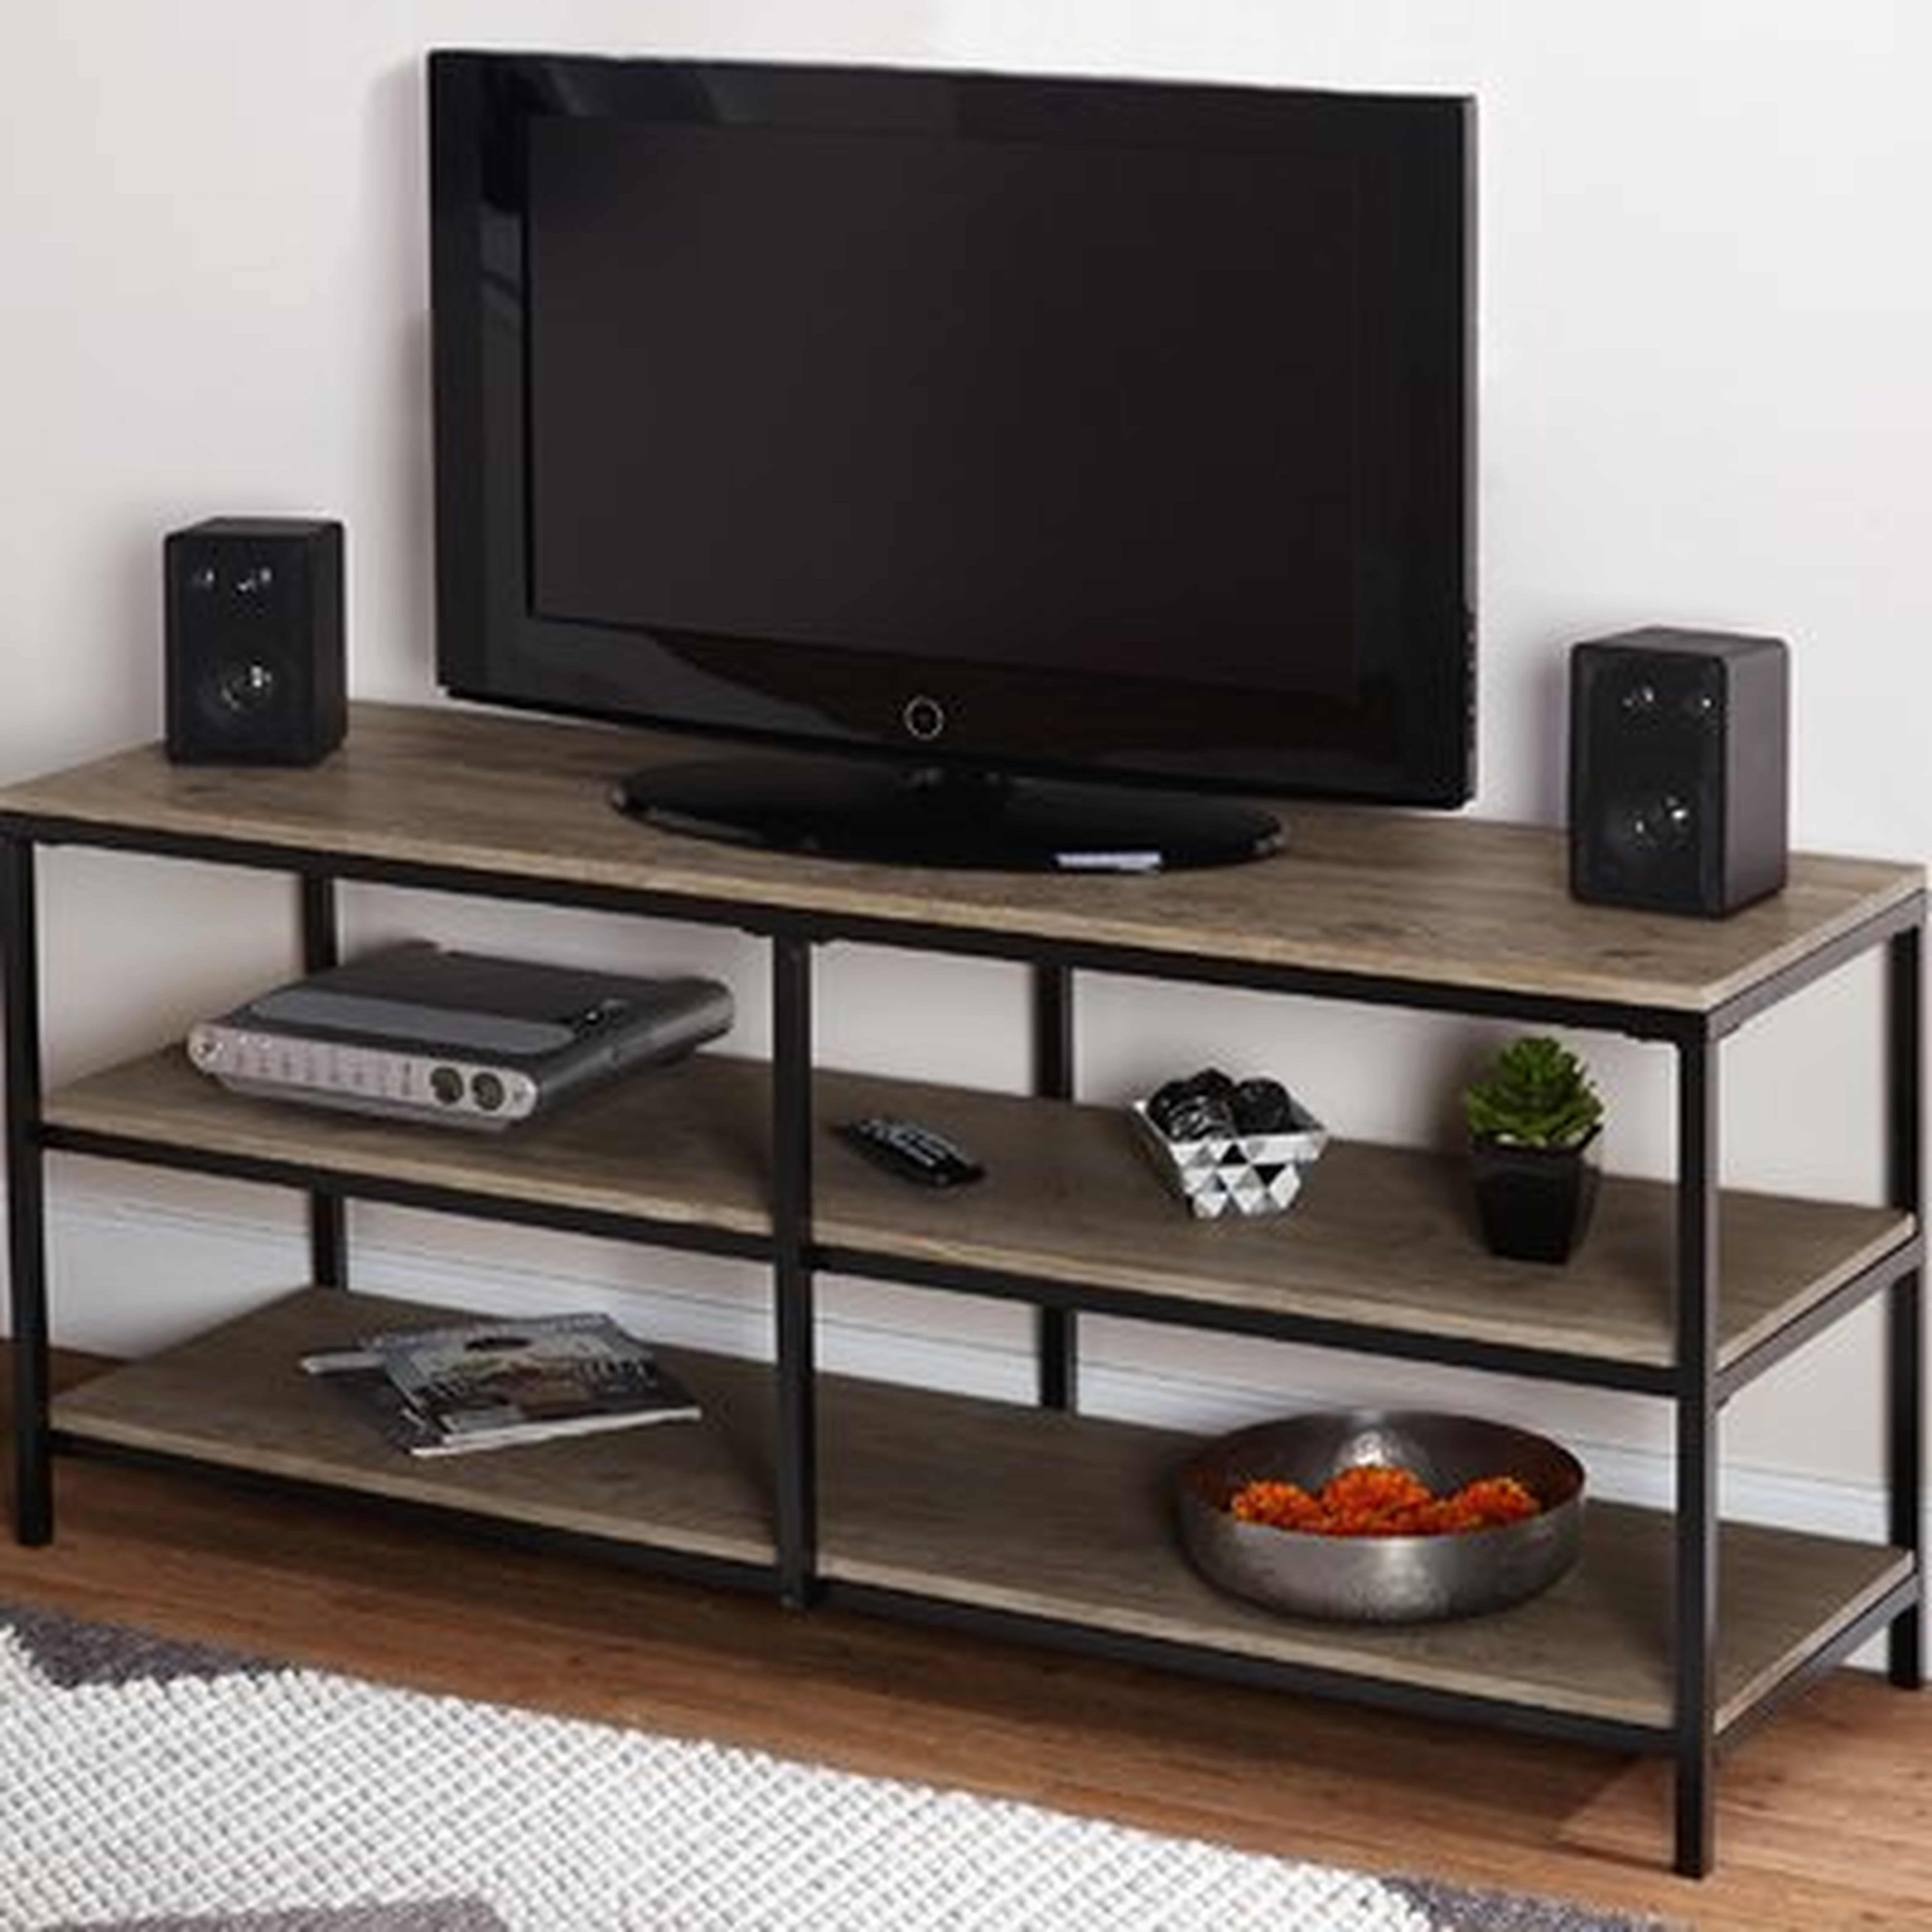 Forteau TV Stand for TVs up to 60" - Wayfair